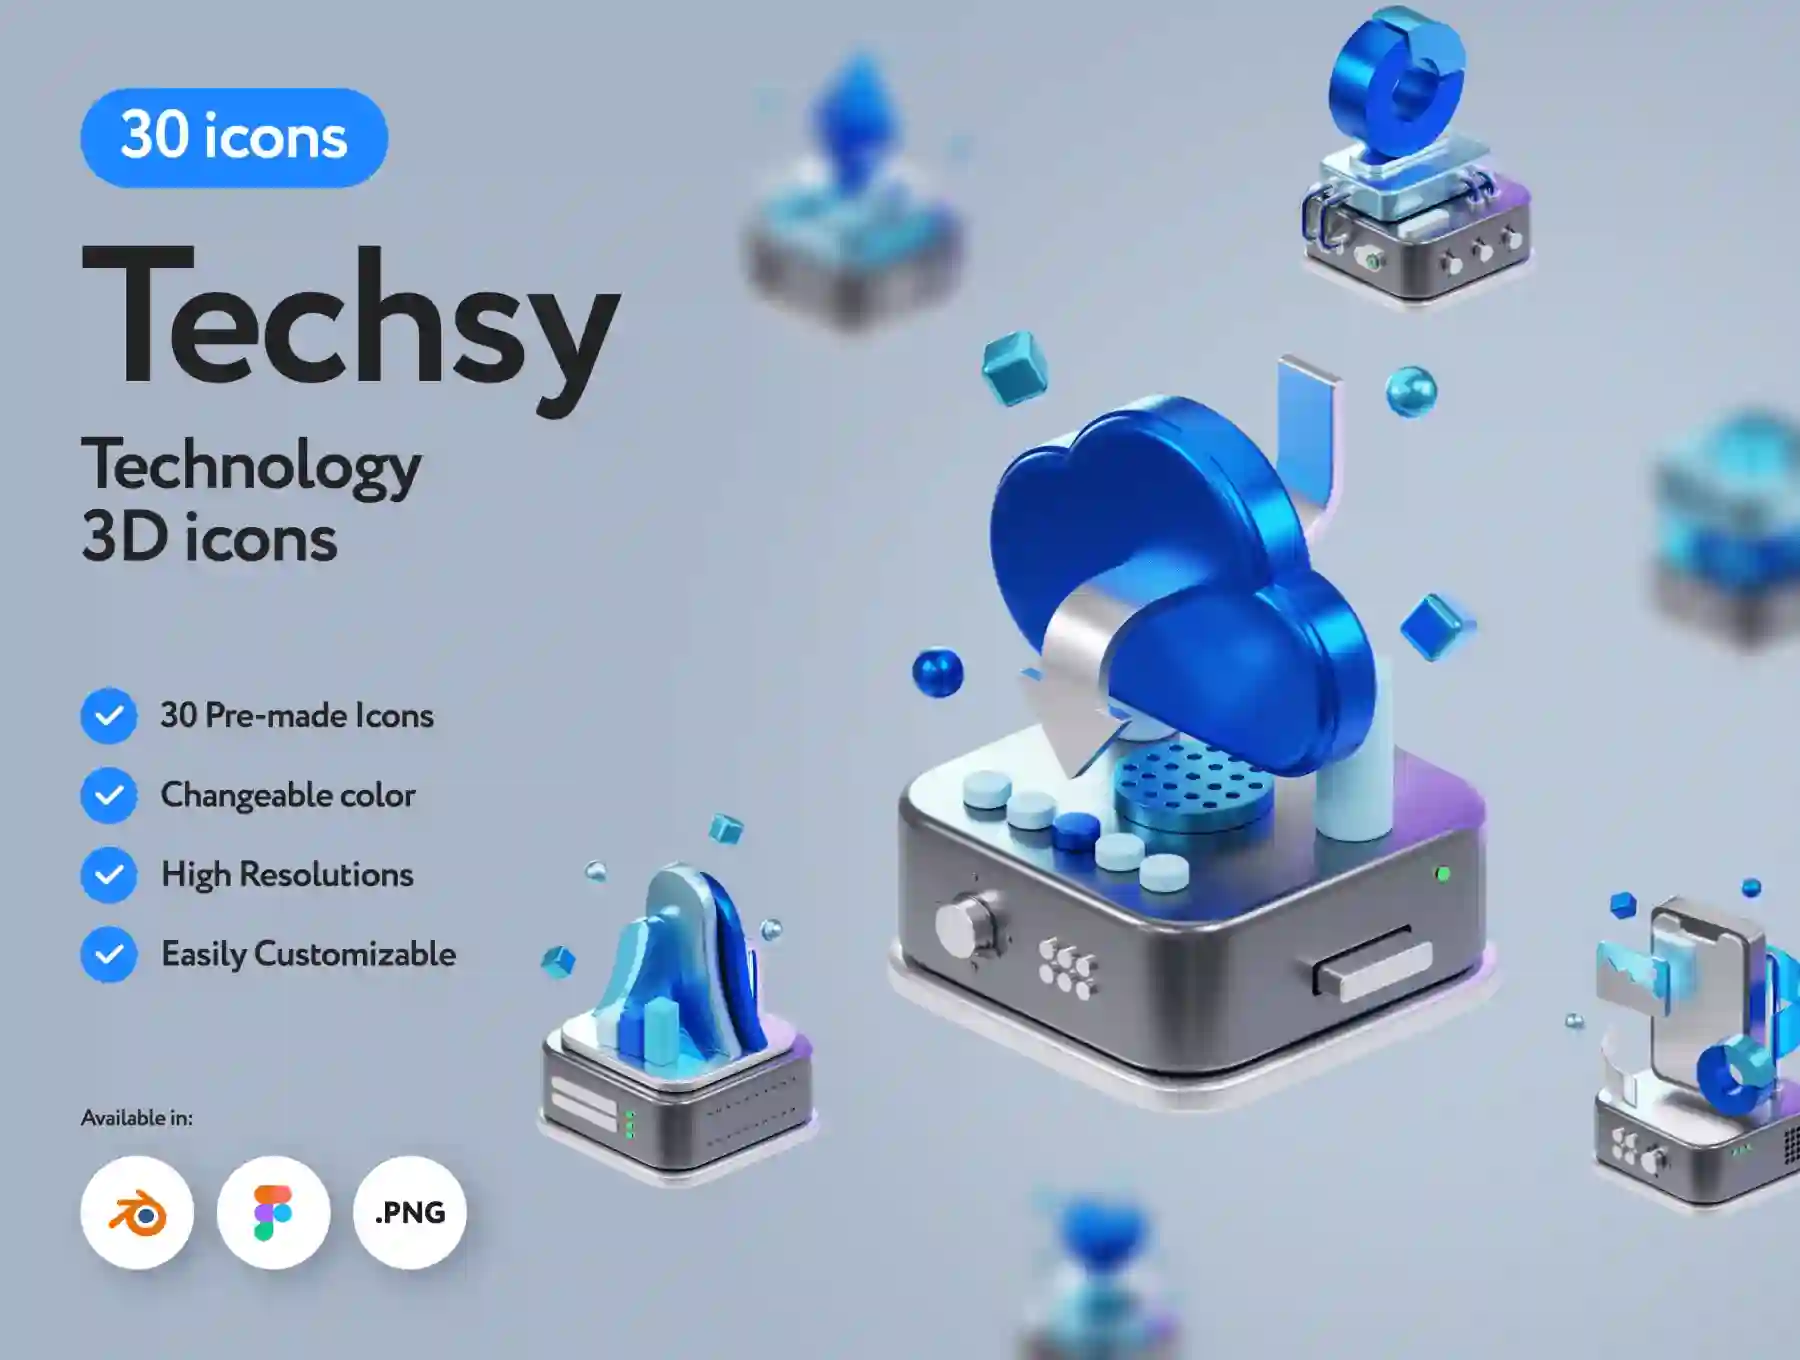 Techsy Technology 3D Icons